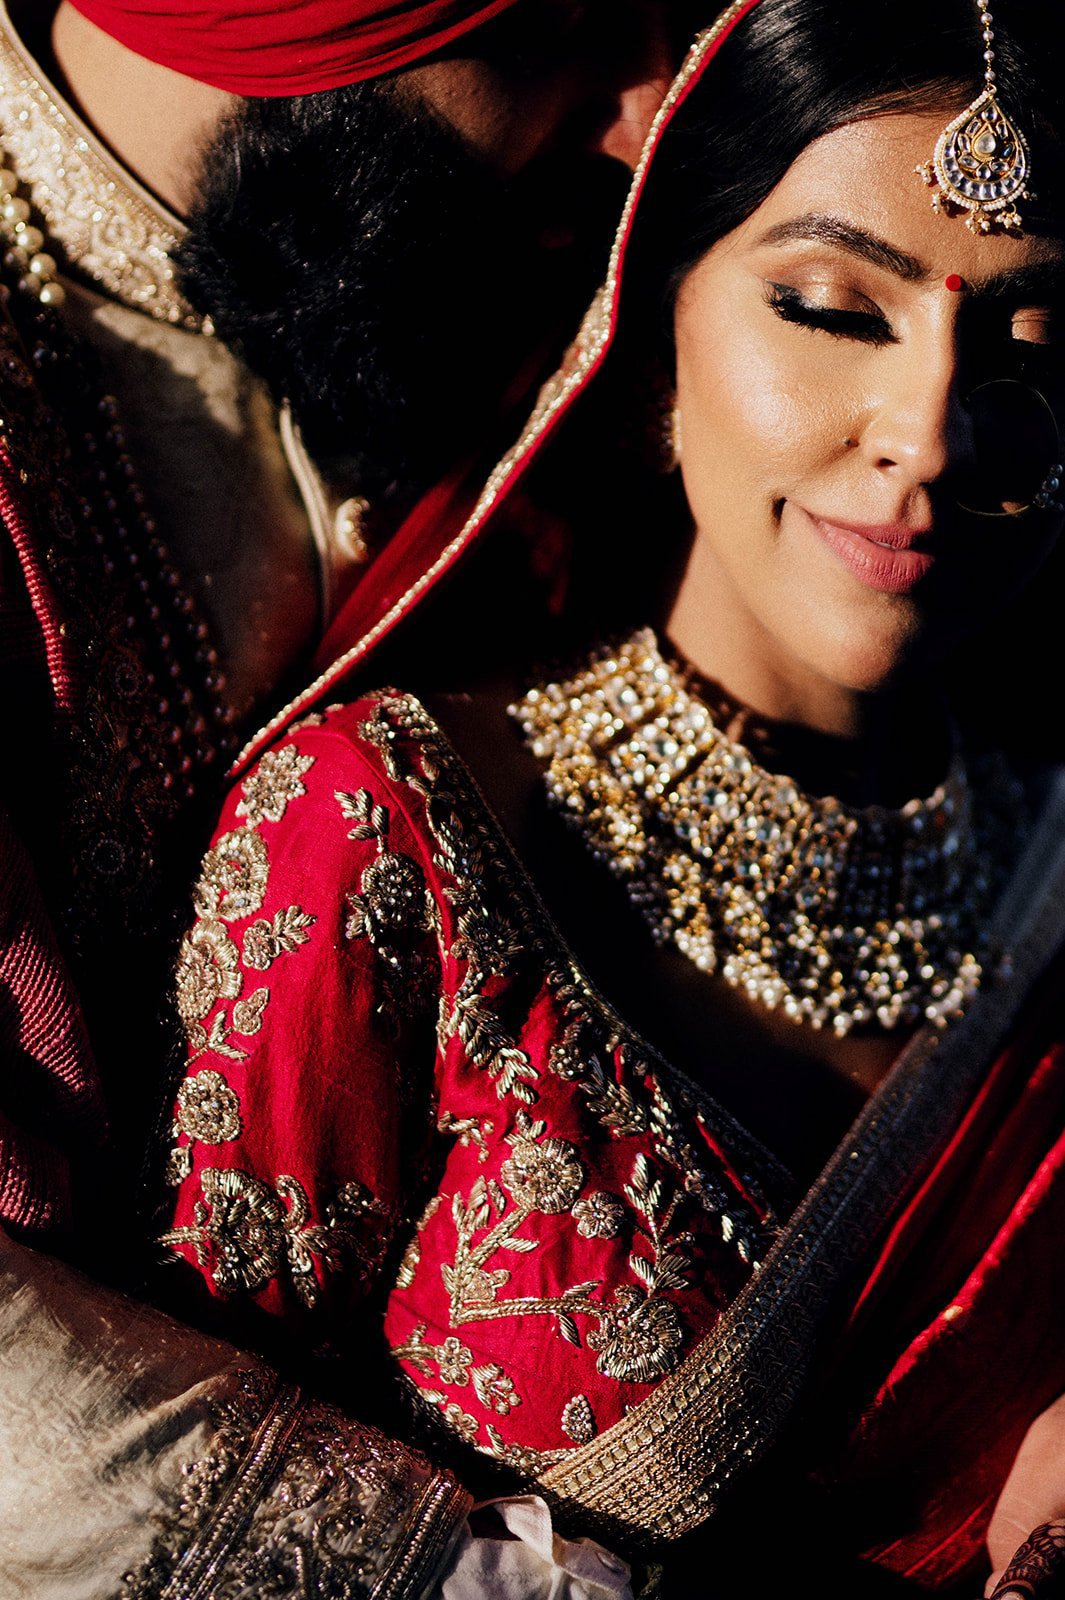 An Indian groom cuddles into his bride in close up photograph.